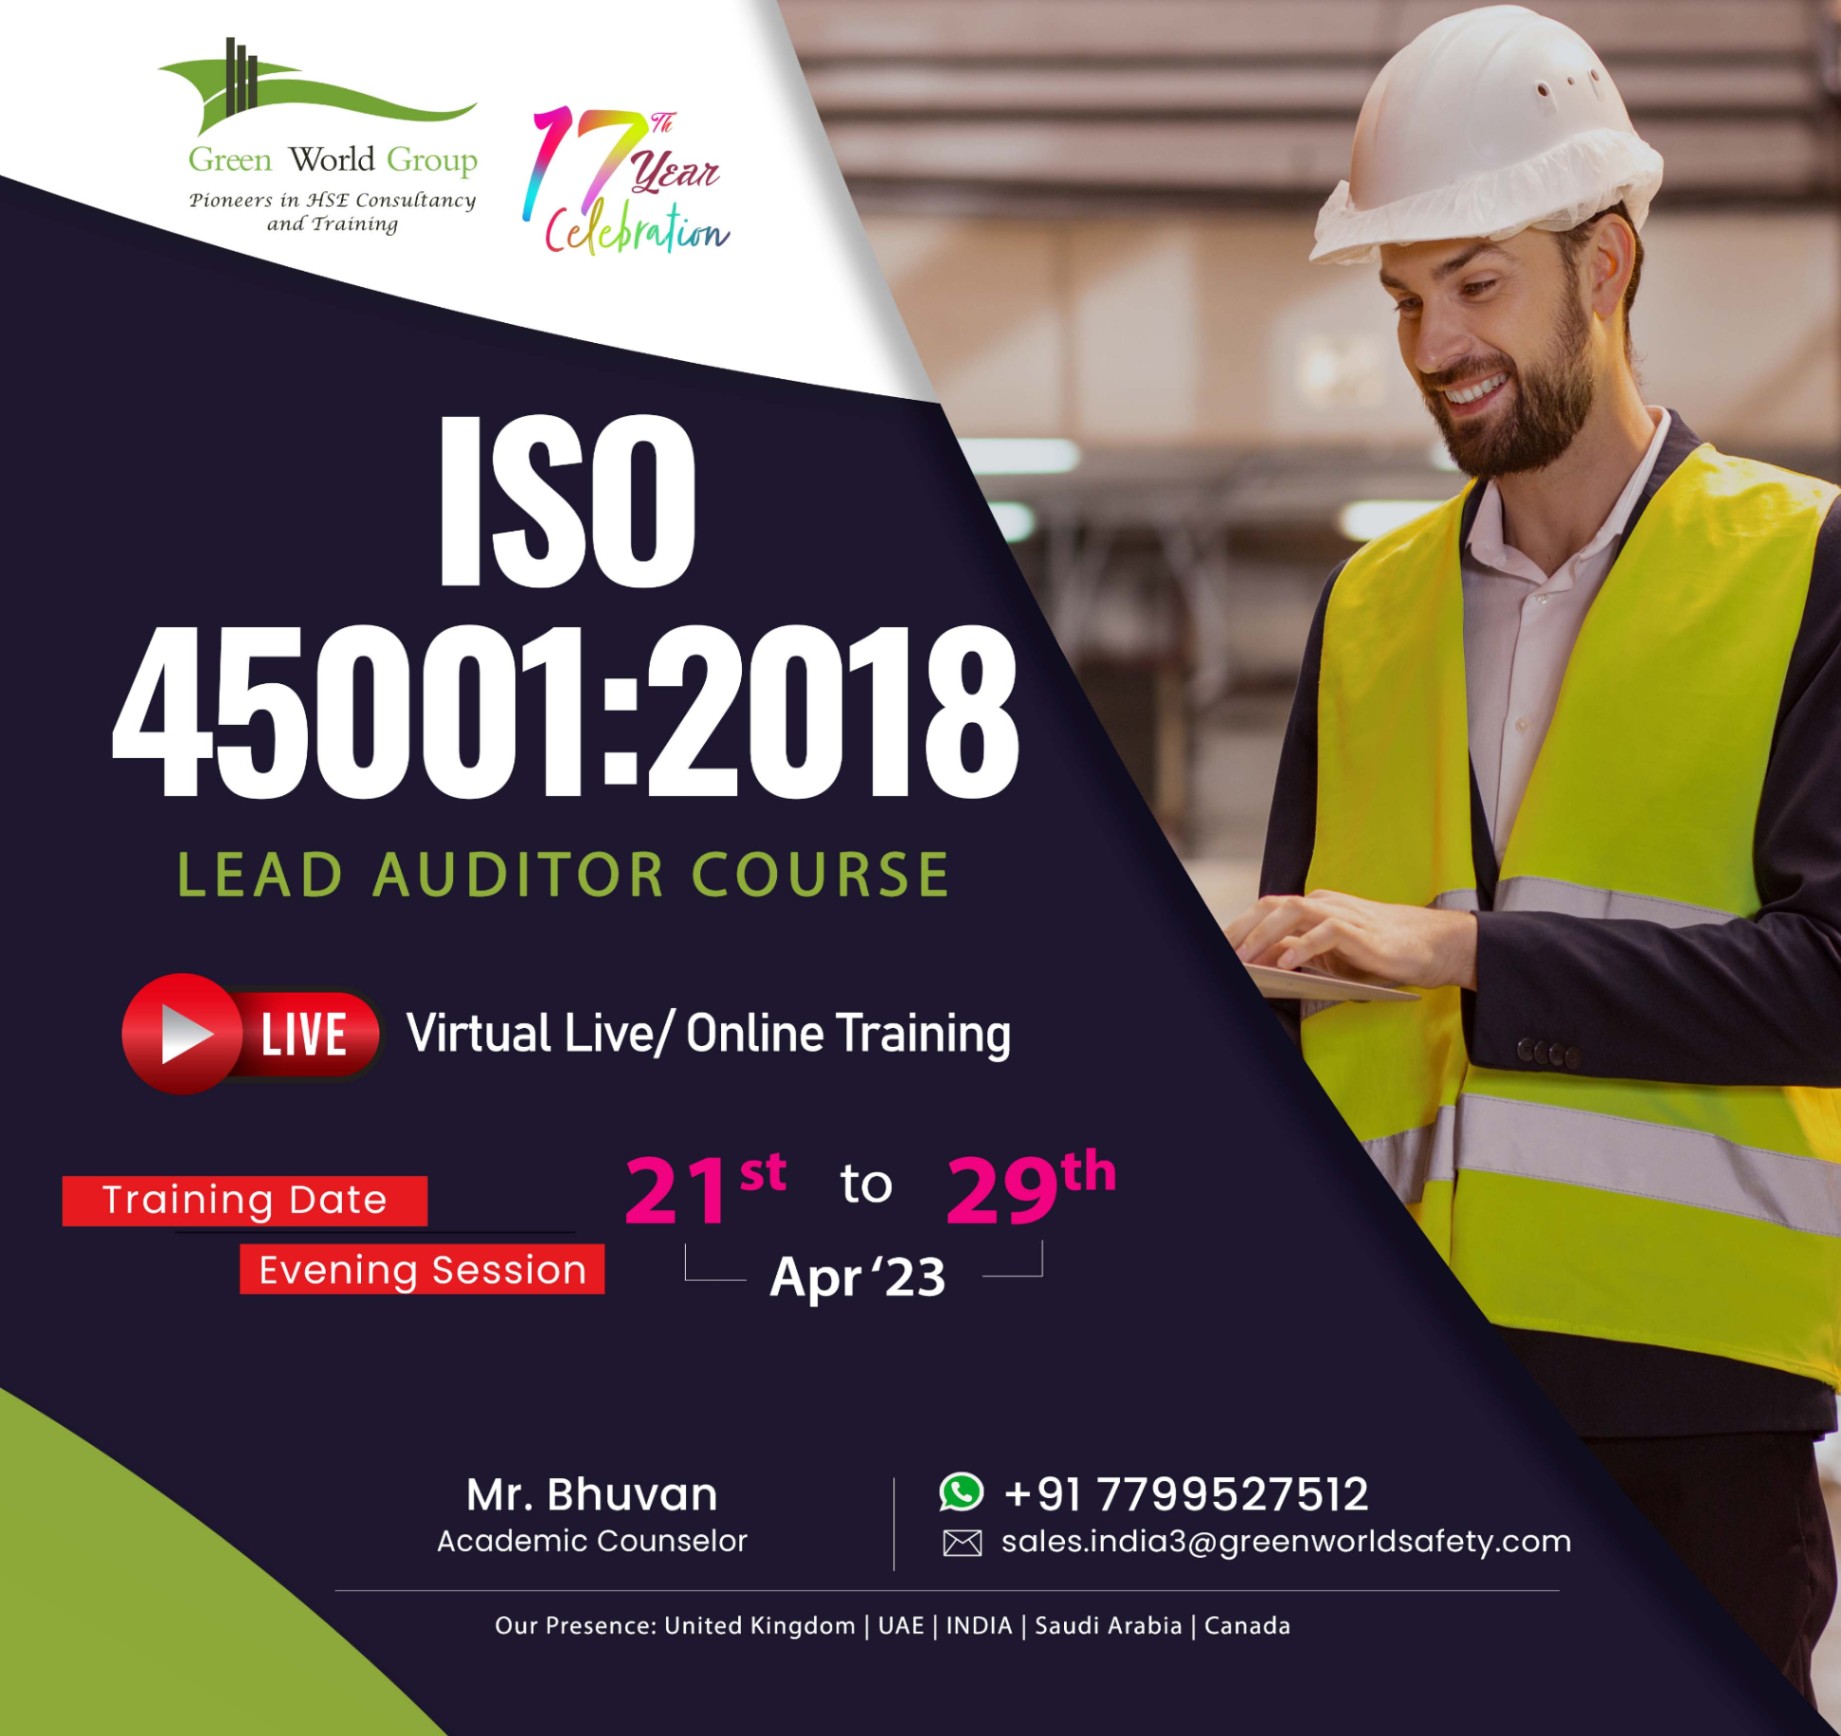 Do You Want to Become a Qualified Lead Auditor?